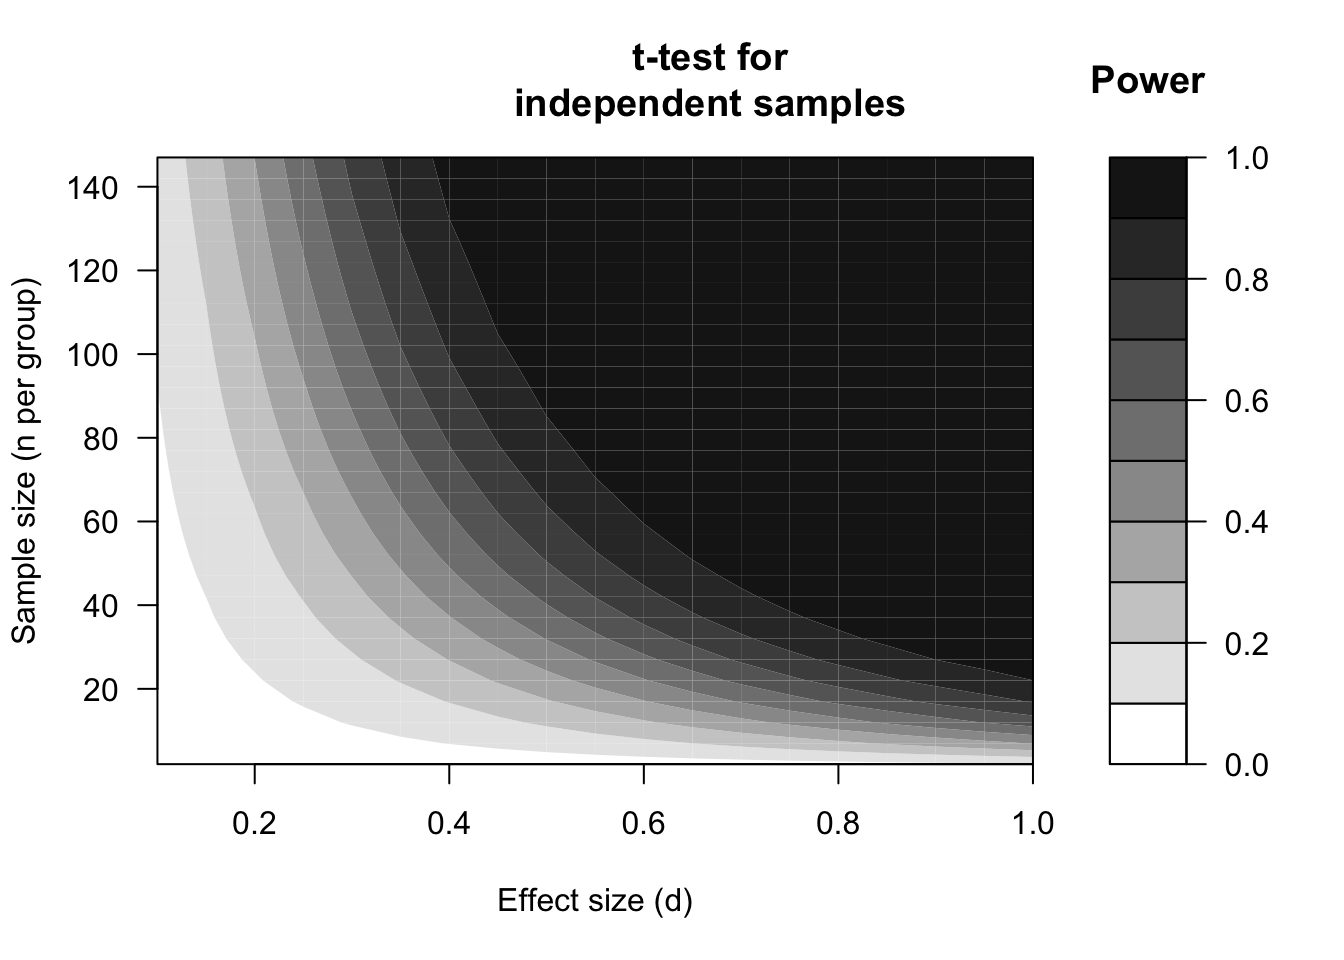 Power expressed in contours (see graduation), dependent on the standardised effect size (d) and the sample size (n), according to a two-sided t-test for unpaired, independent observations with significance level alpha=.05.